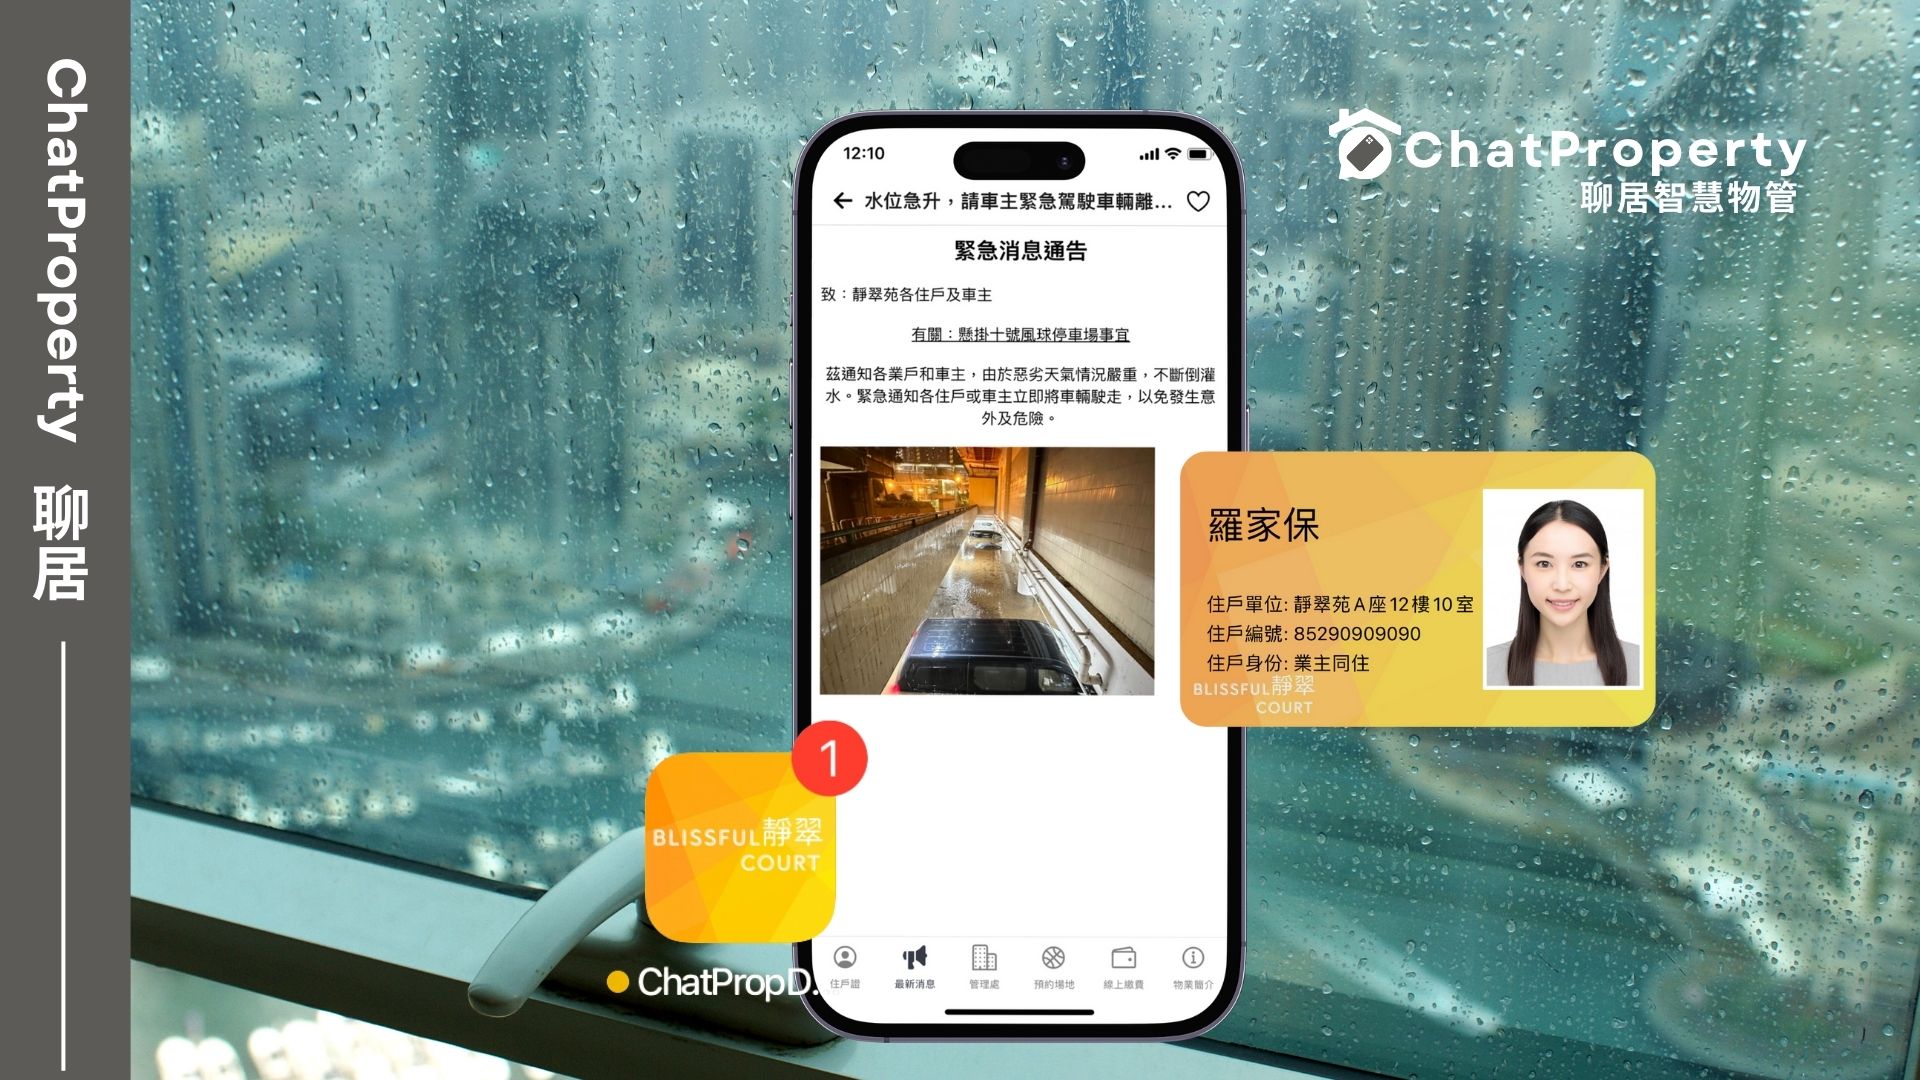 ChatProperty Mobile App for Bad weather_1